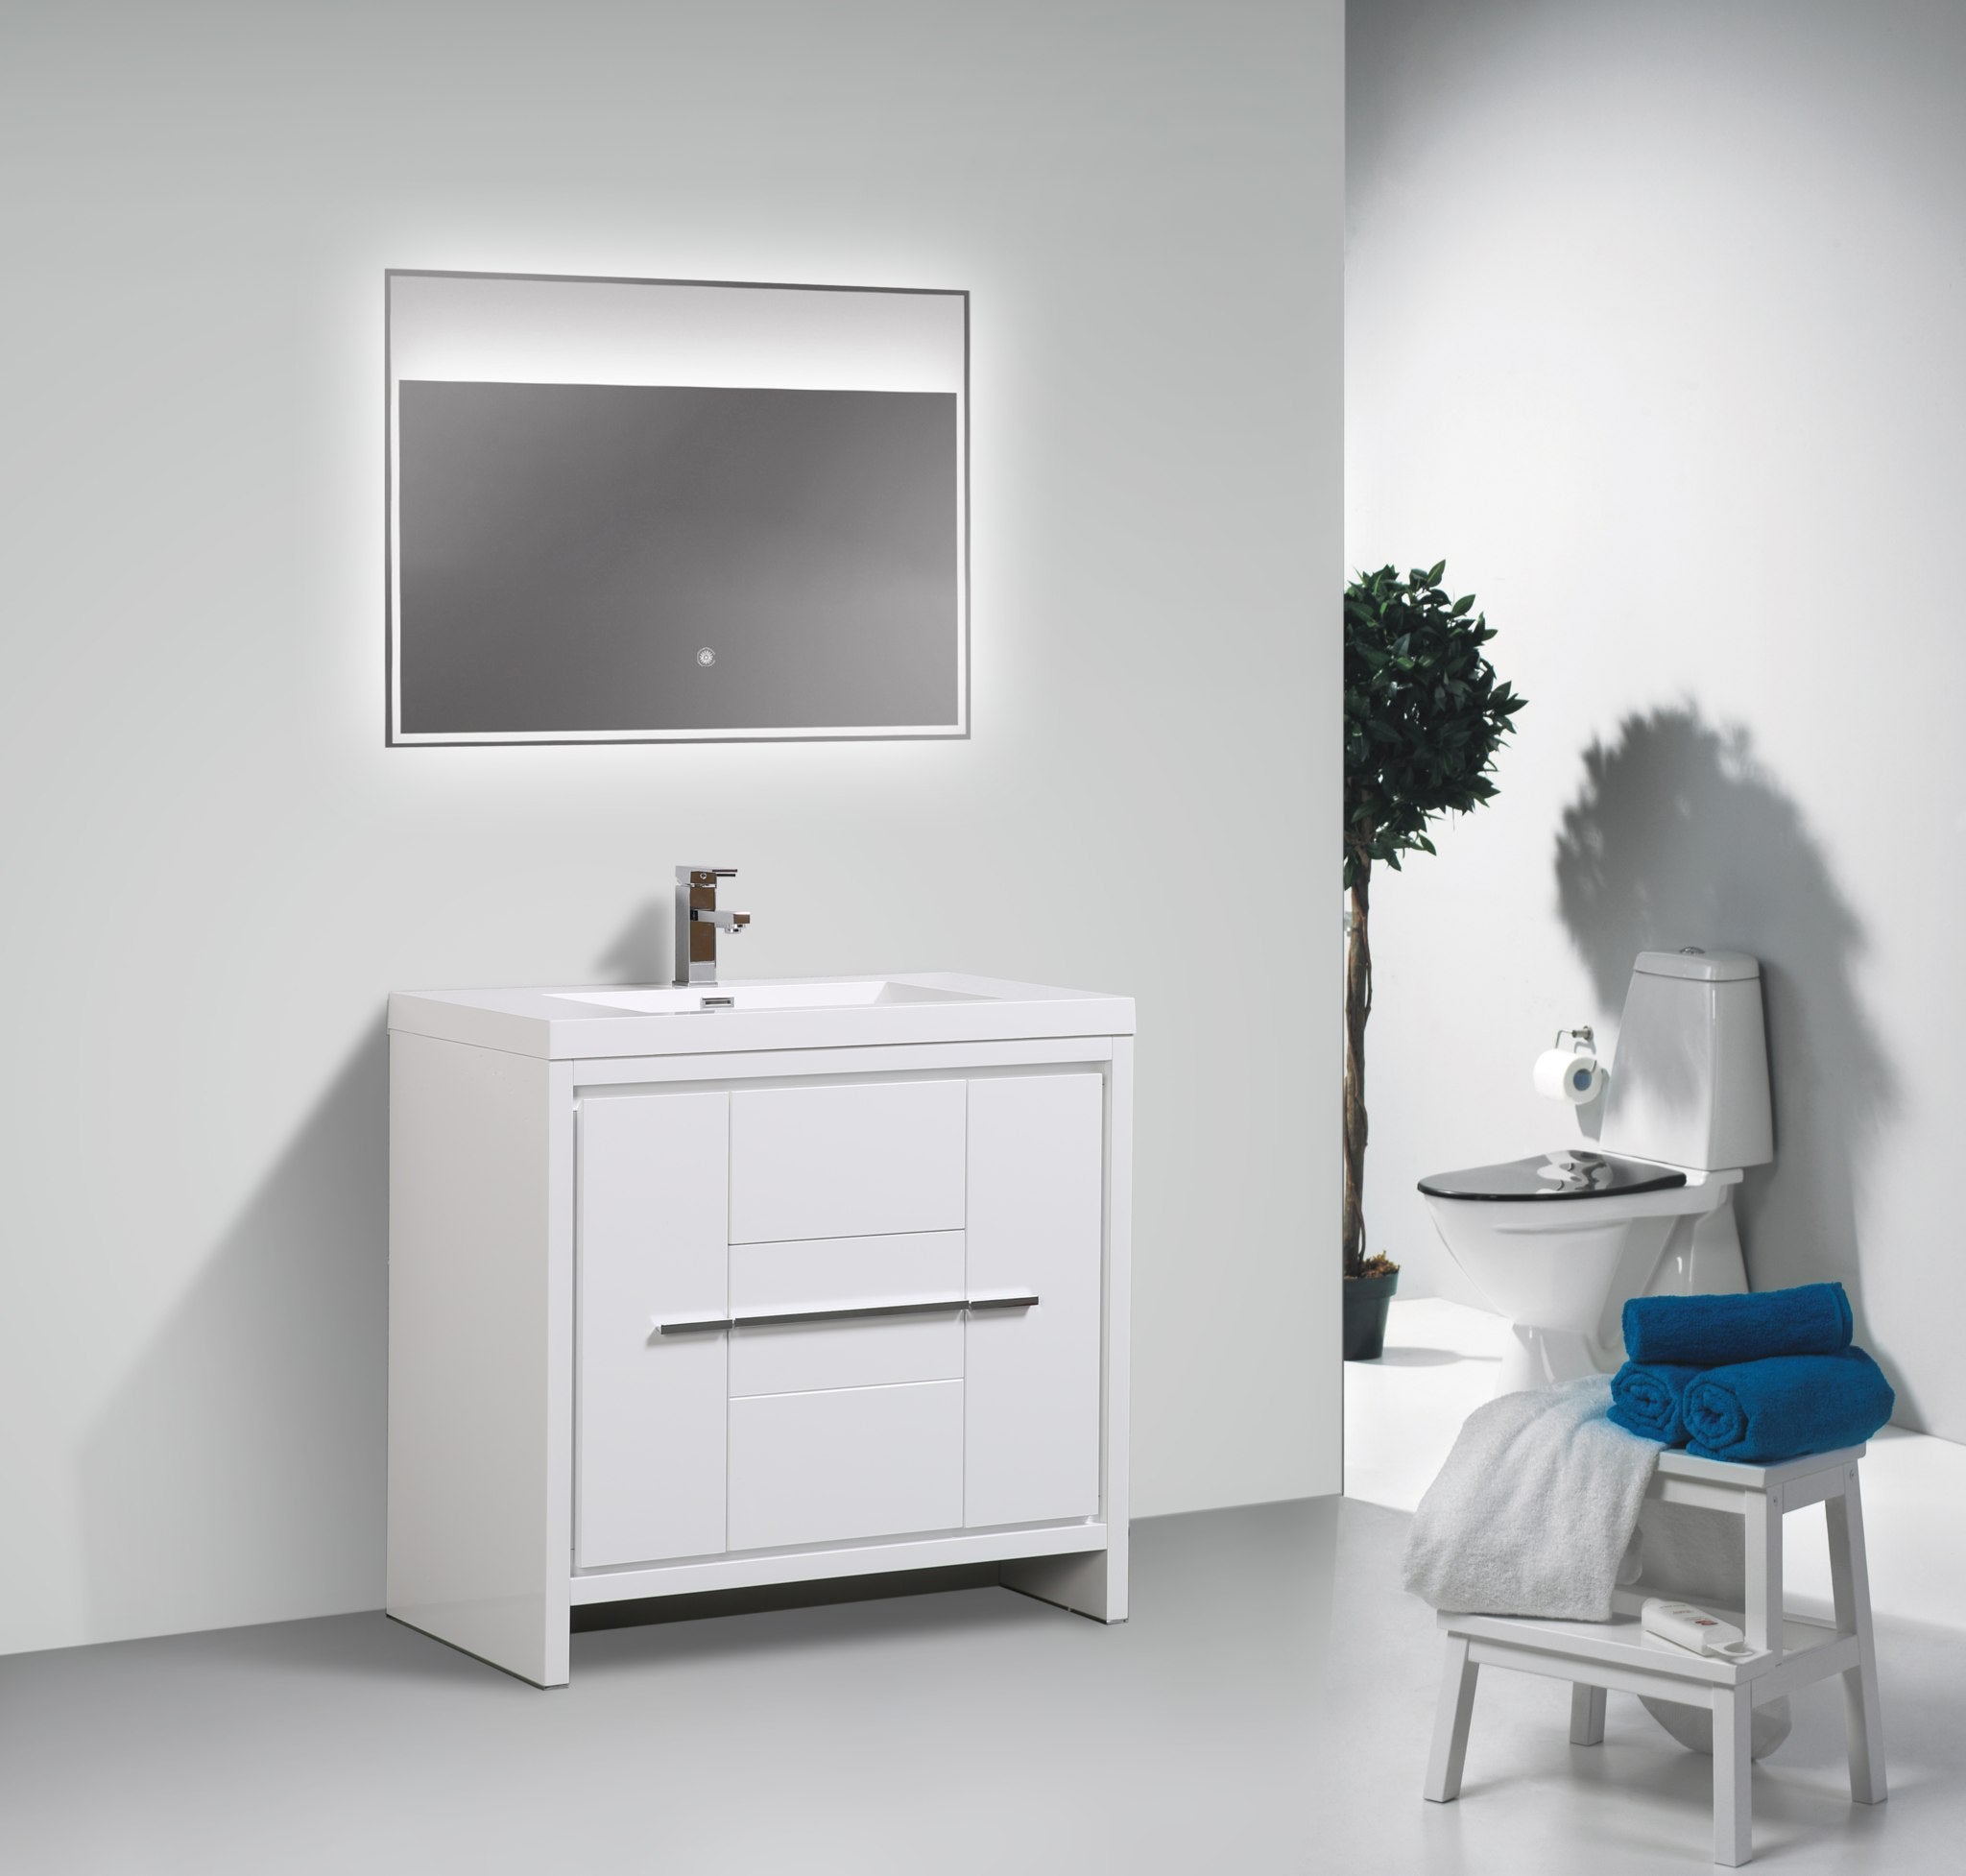 Granada 35.5 White High Gloss With Chrome Handle Cabinet, Square Cultured Marble Sink, Free Standing Modern Vanity Set